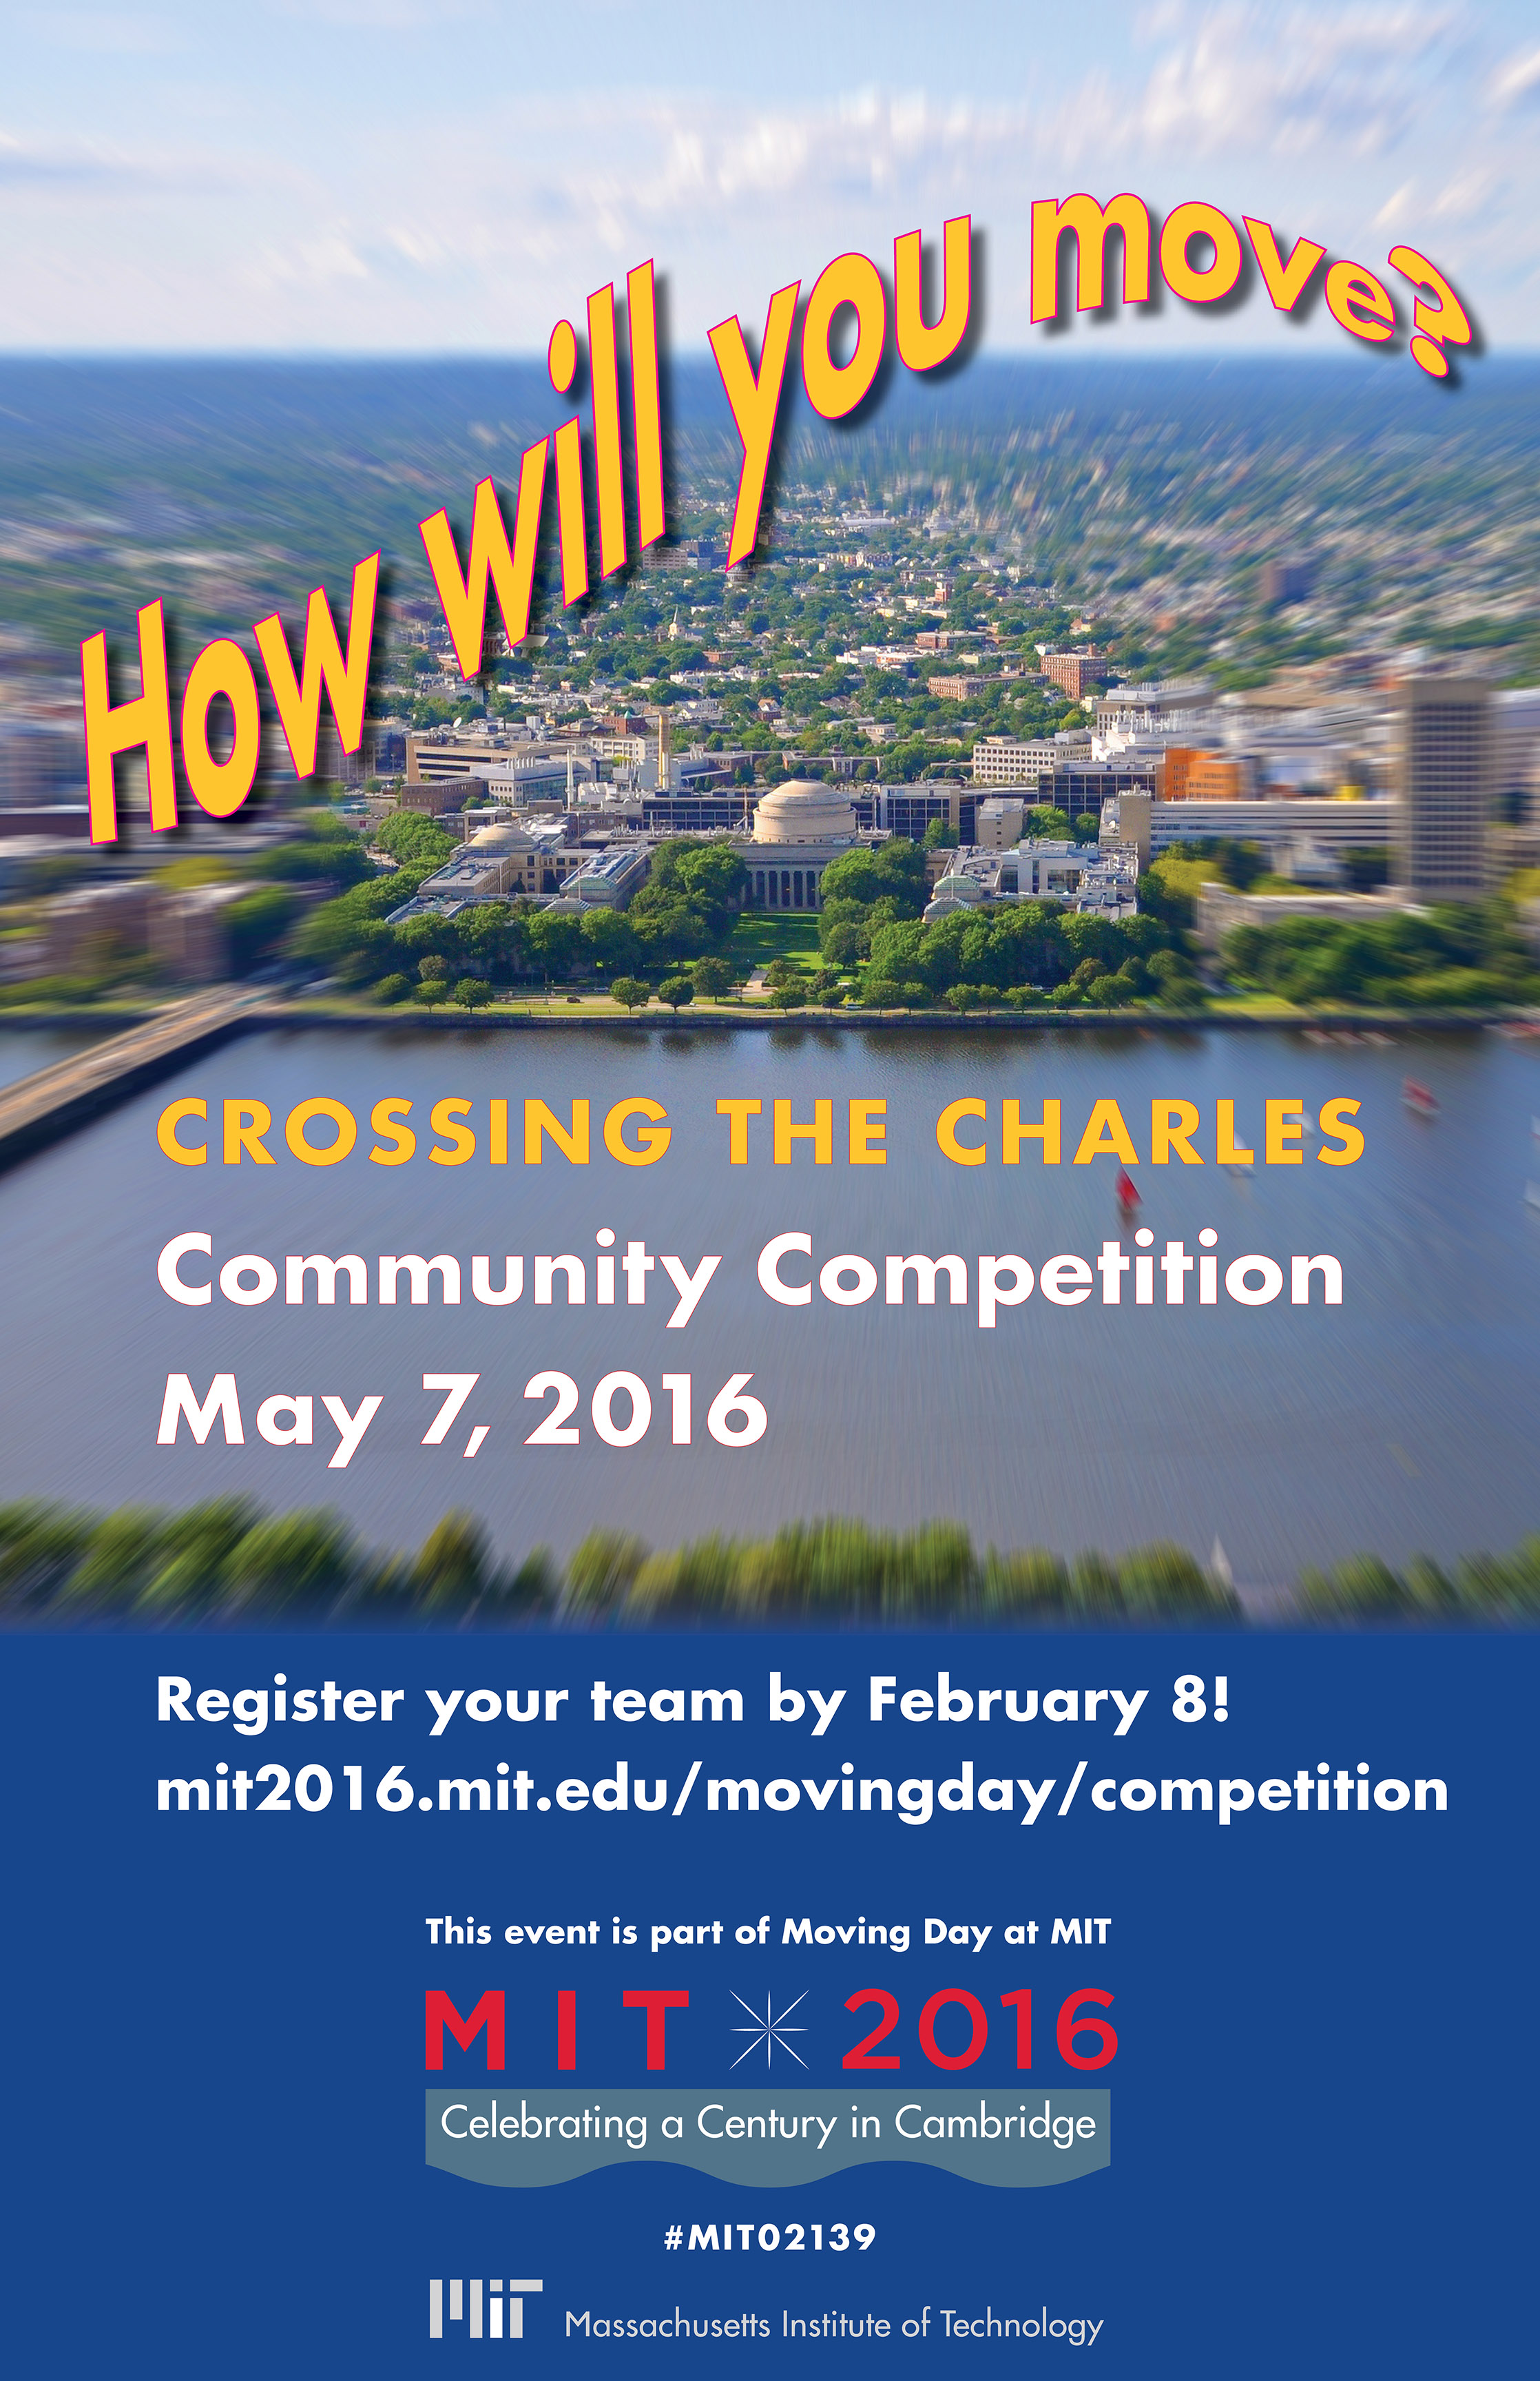 Call for entries for Crossing the Charles competition